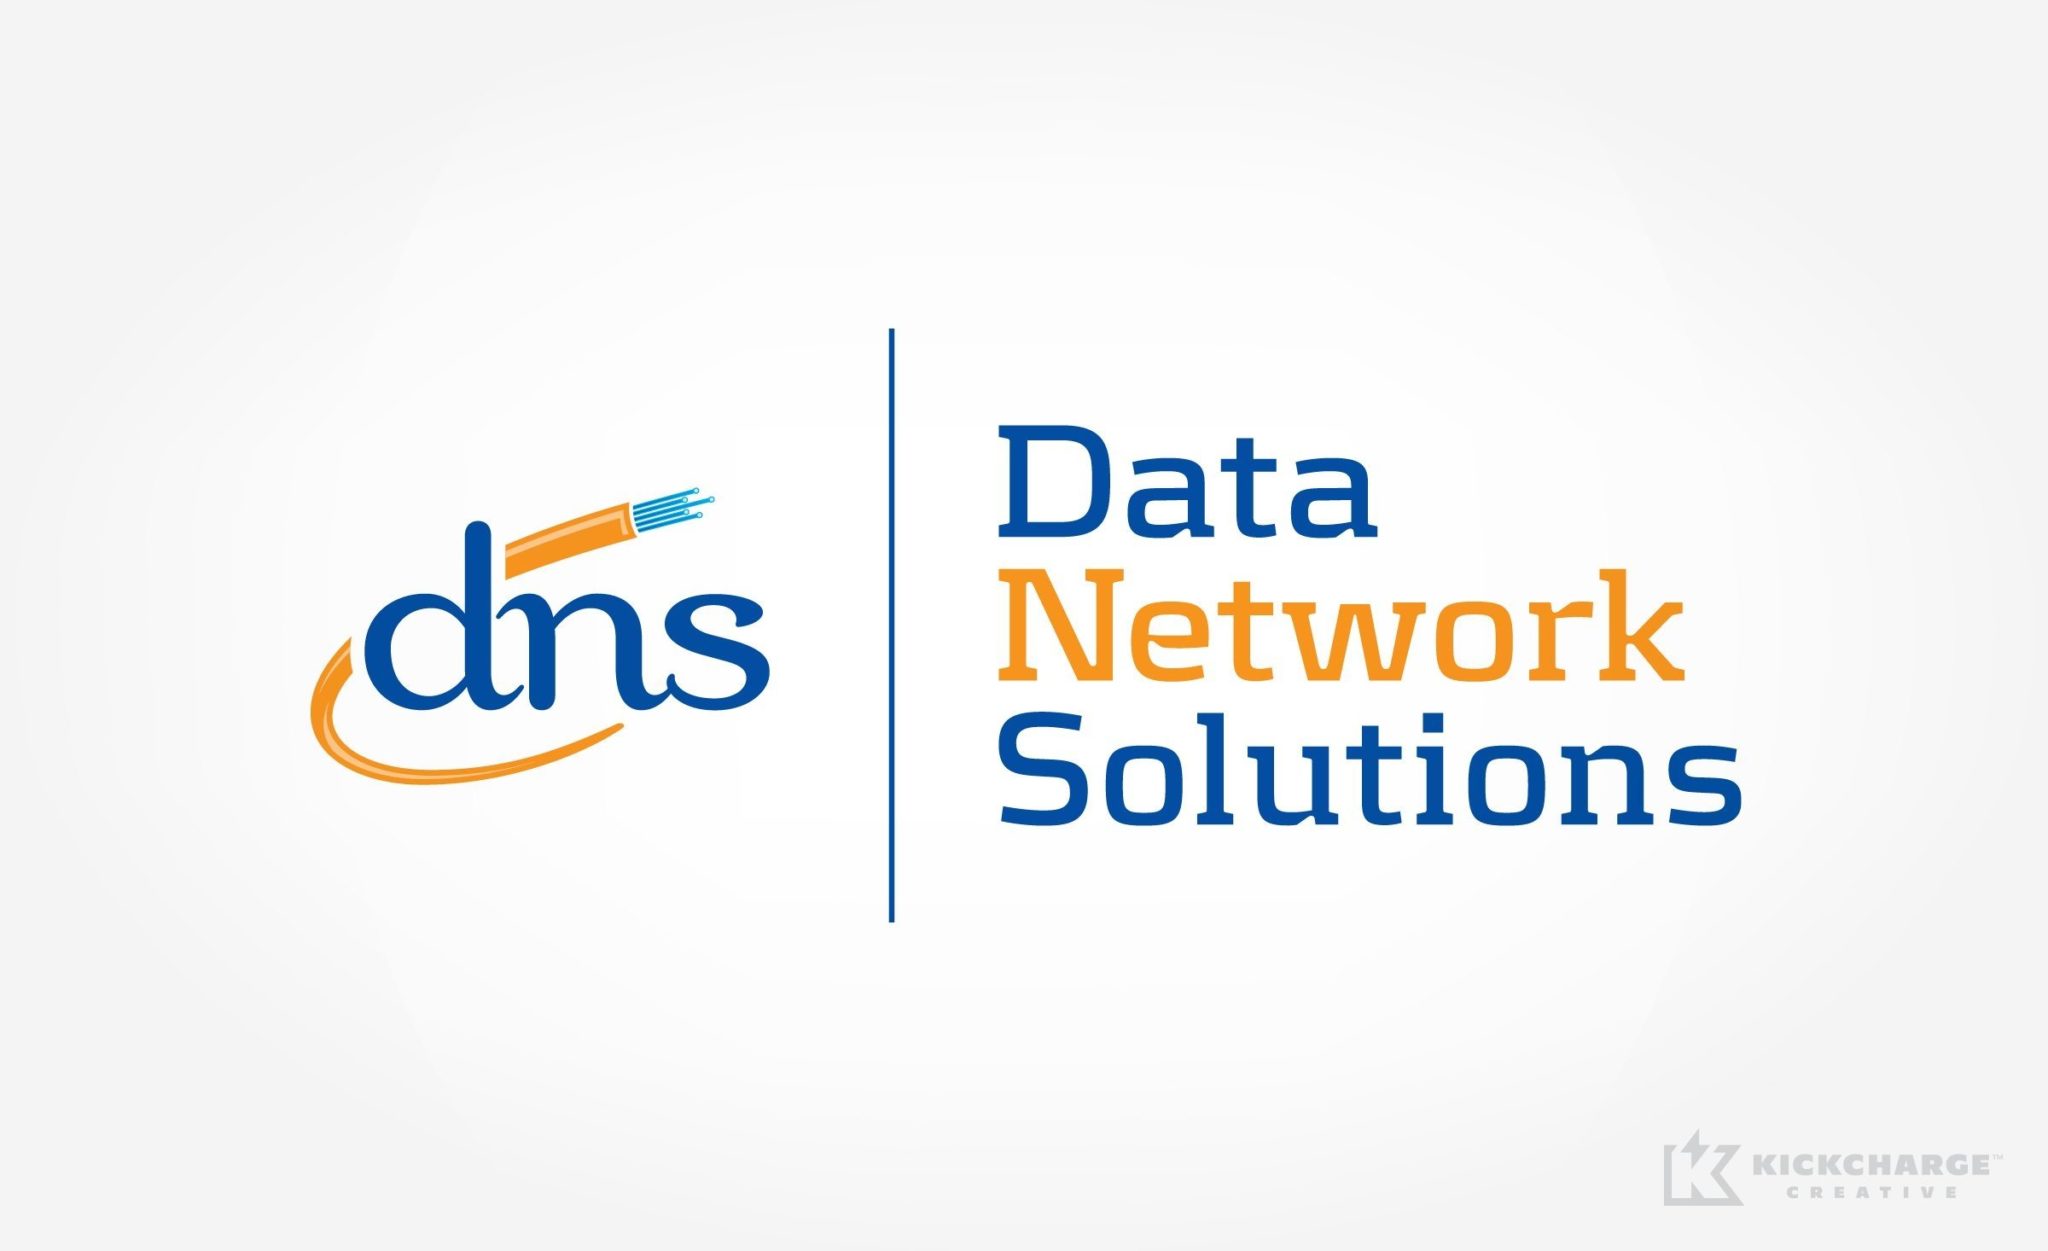 Data Network Solutions